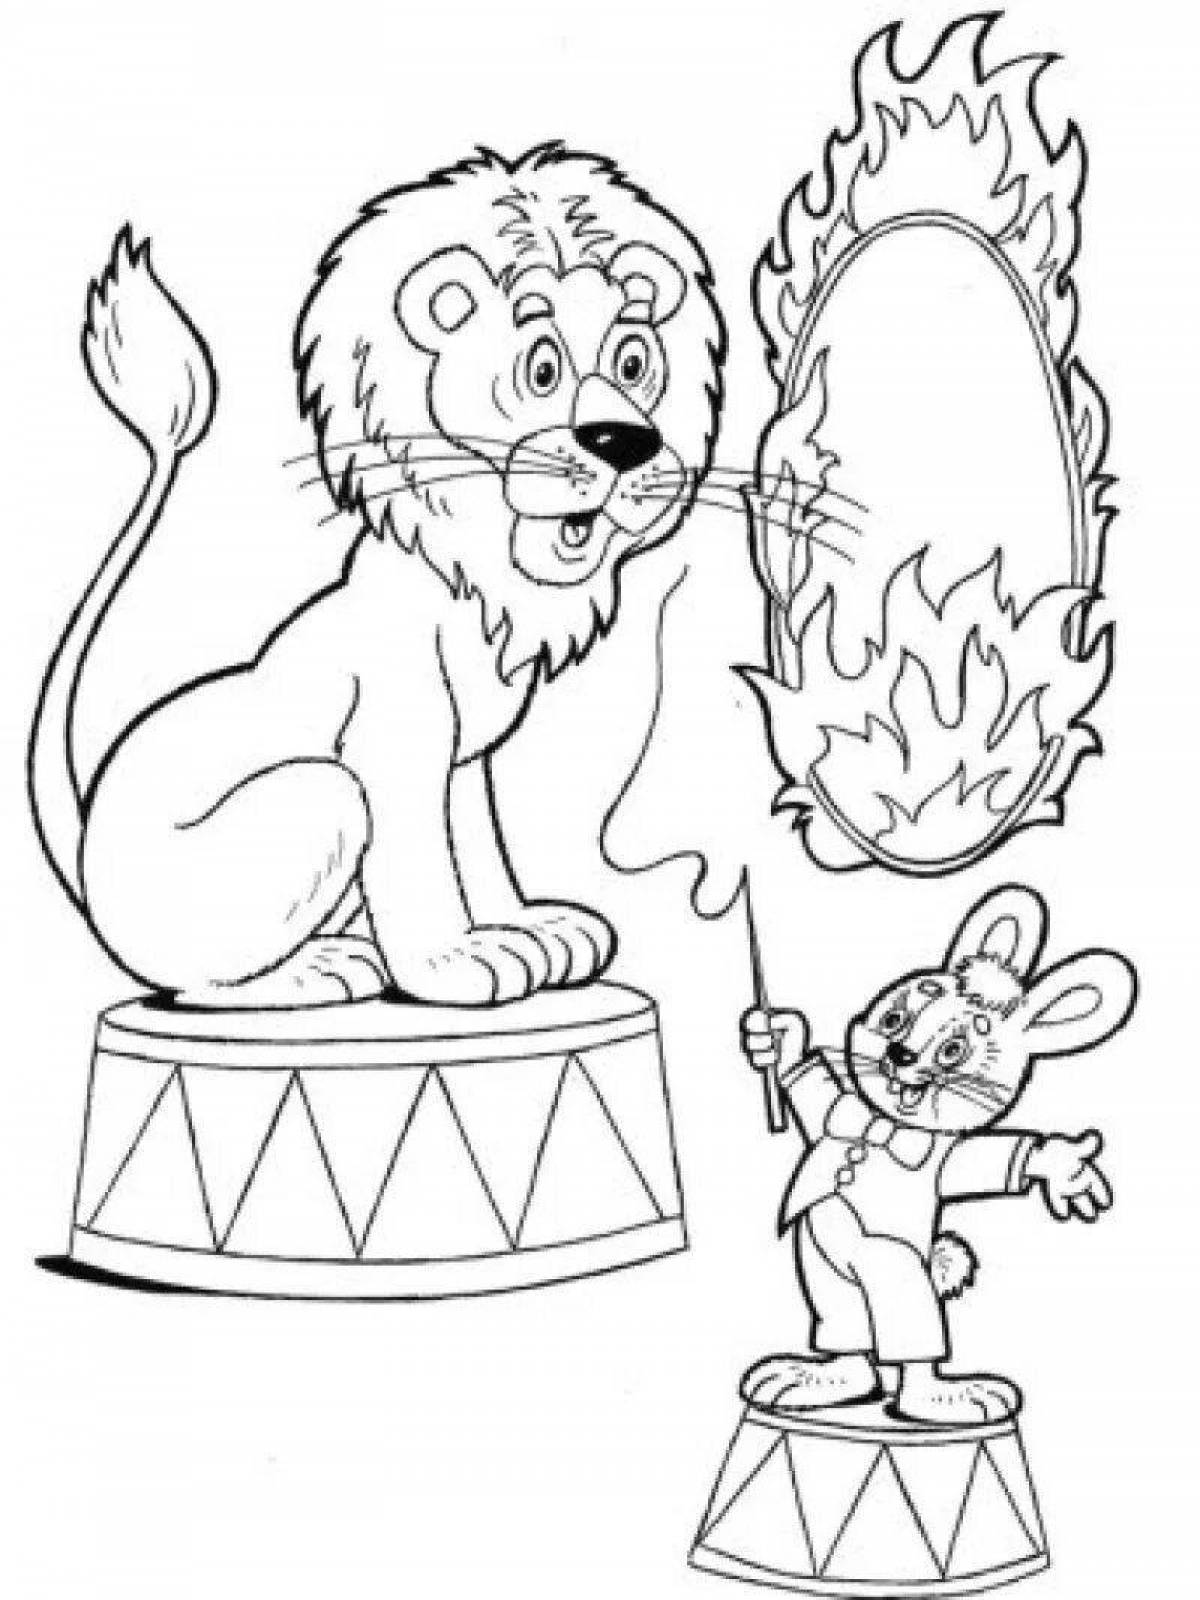 Fancy circus arena coloring page